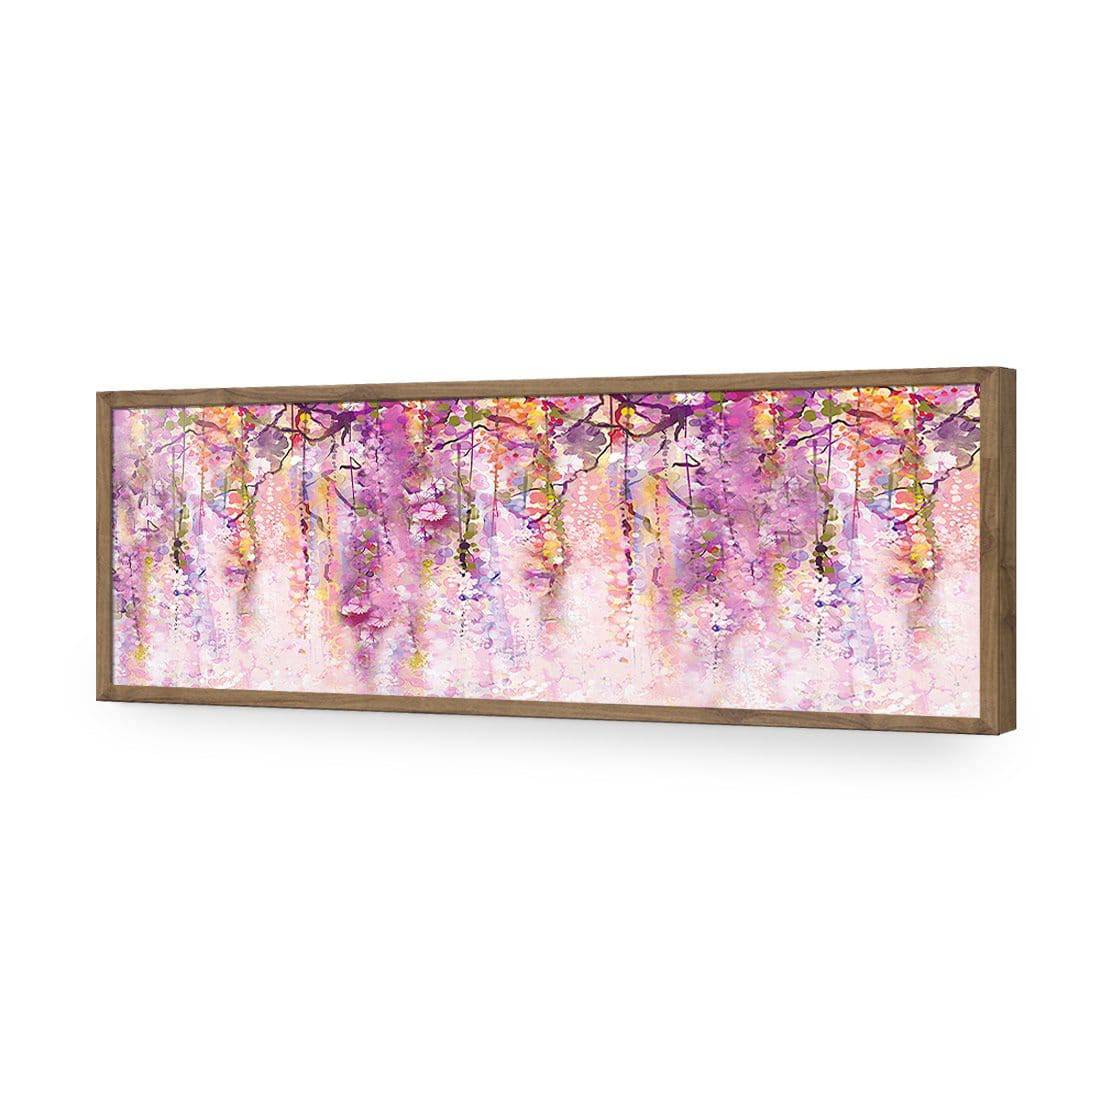 Lilac Dream, Long-Acrylic-Wall Art Design-Without Border-Acrylic - Natural Frame-60x20cm-Wall Art Designs